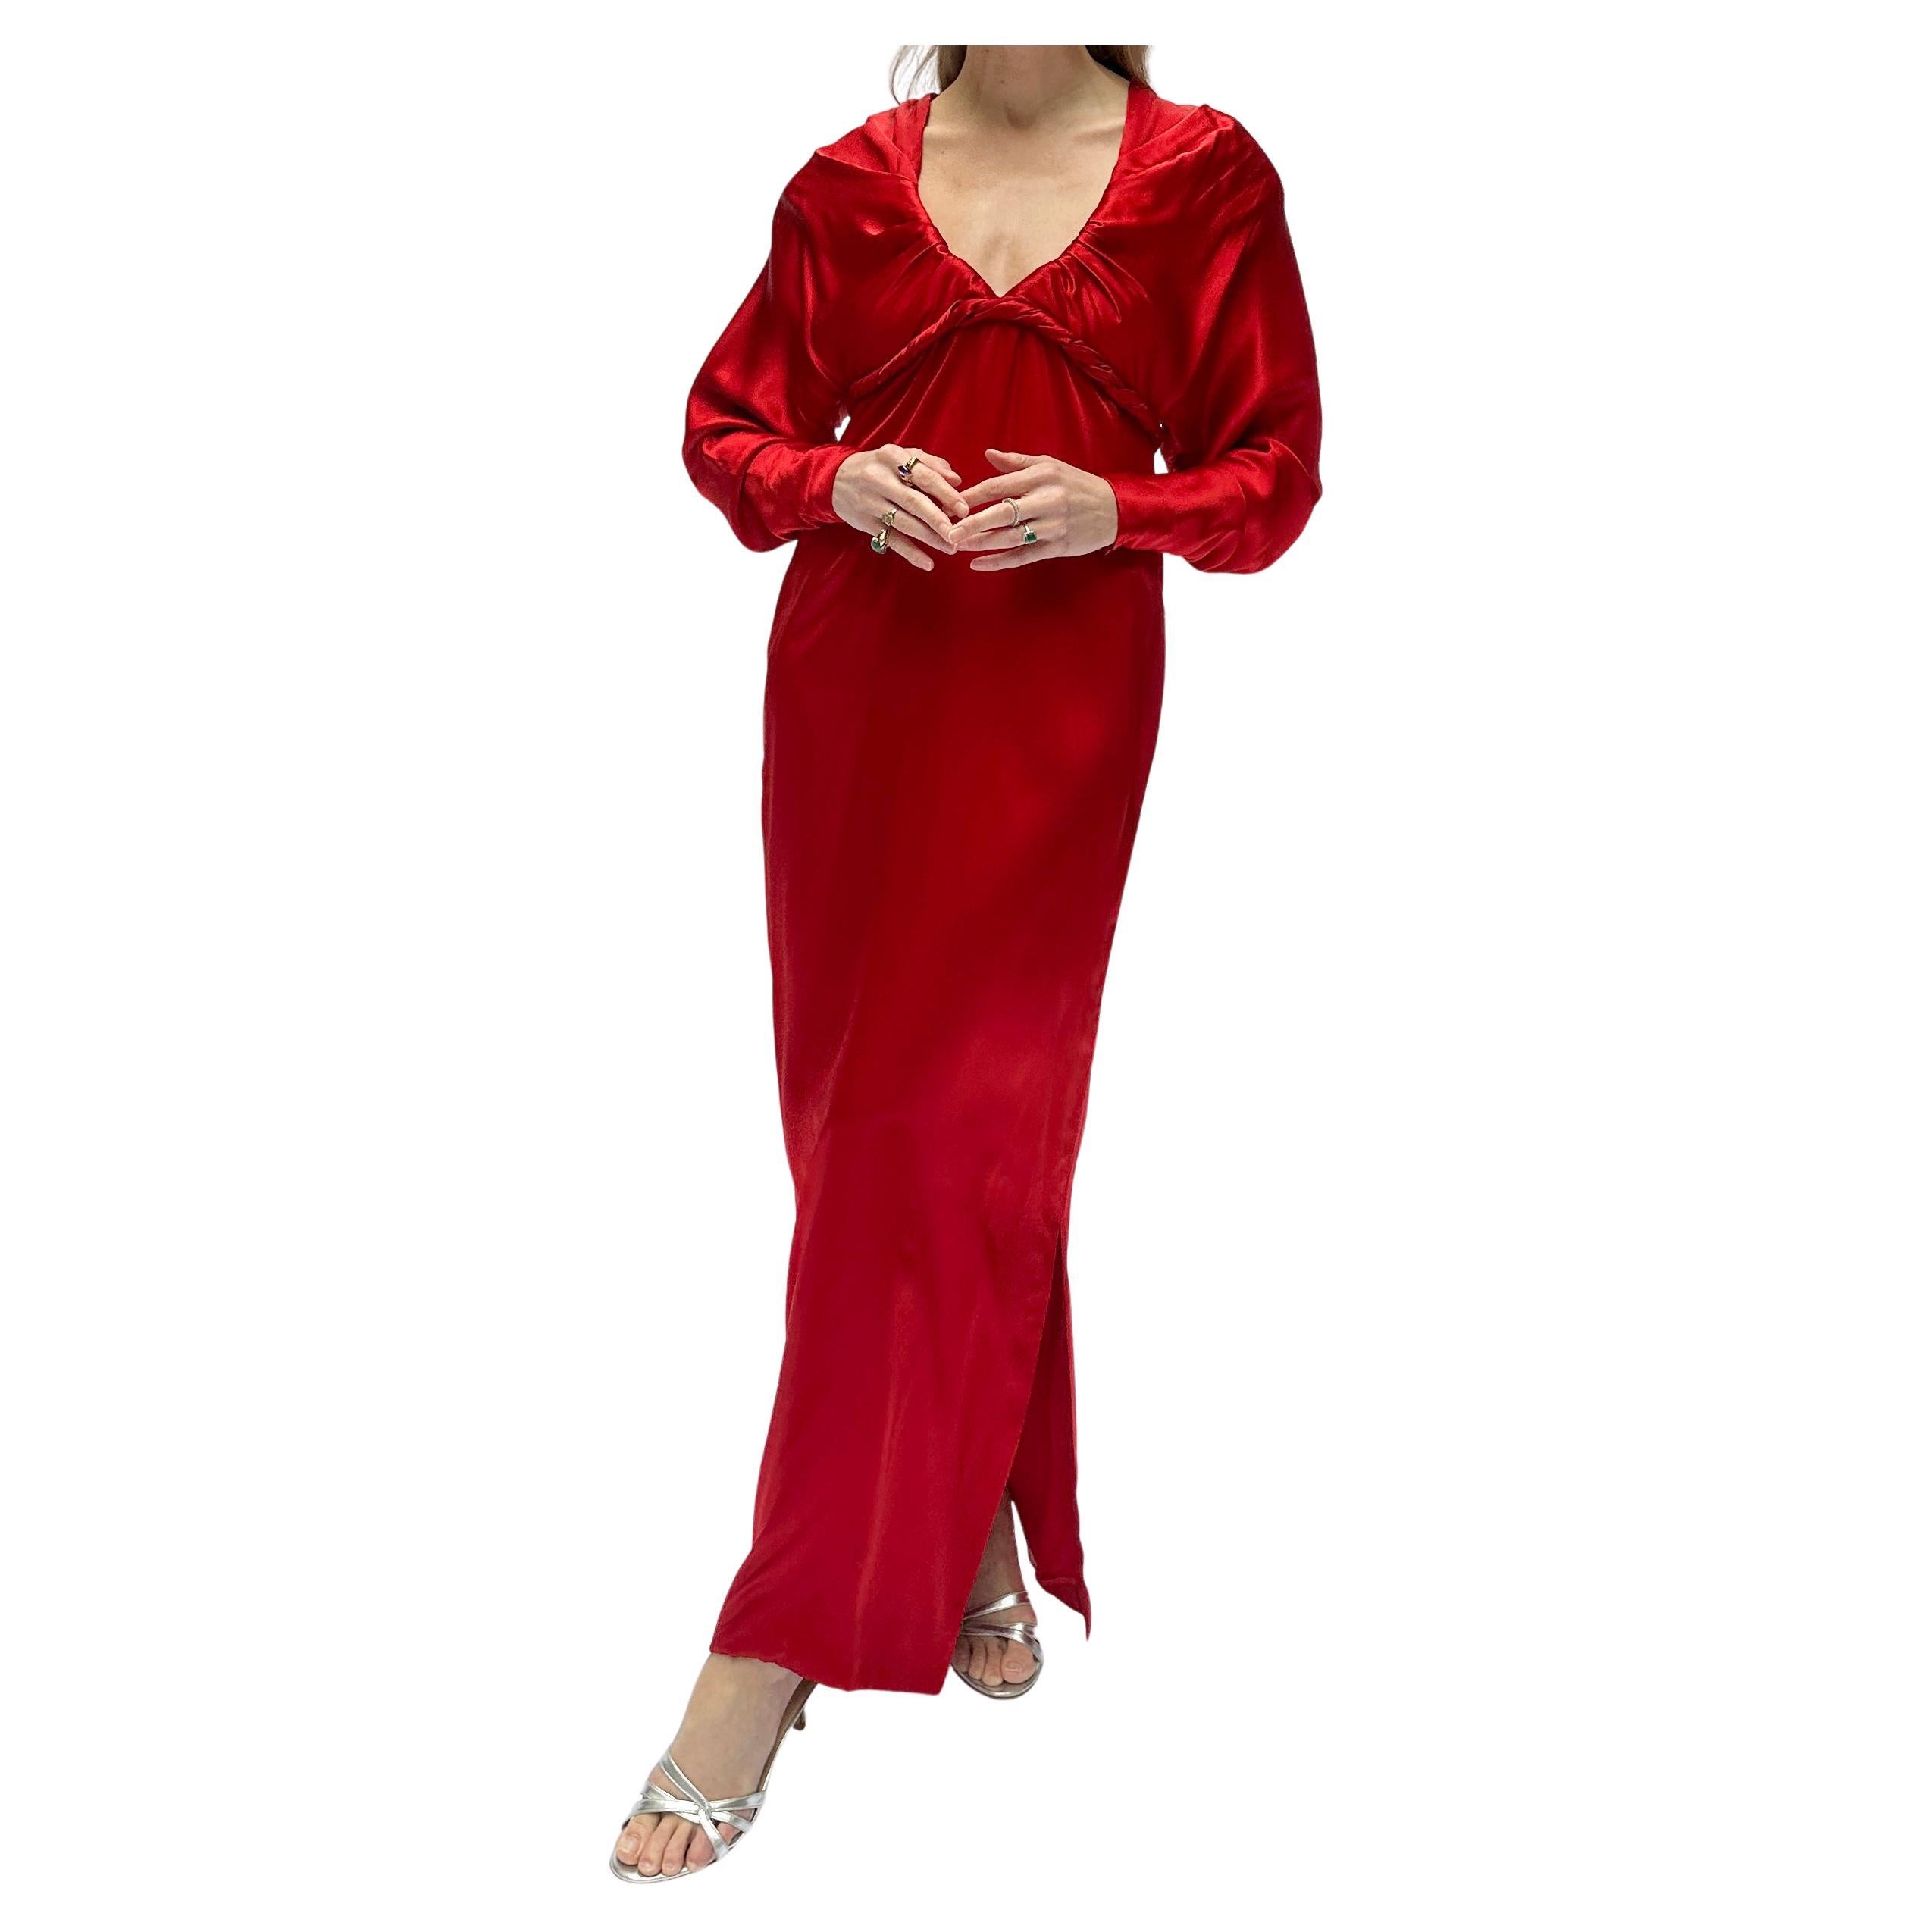 1980s Galanos Demi-Couture Satin Gown For Sale